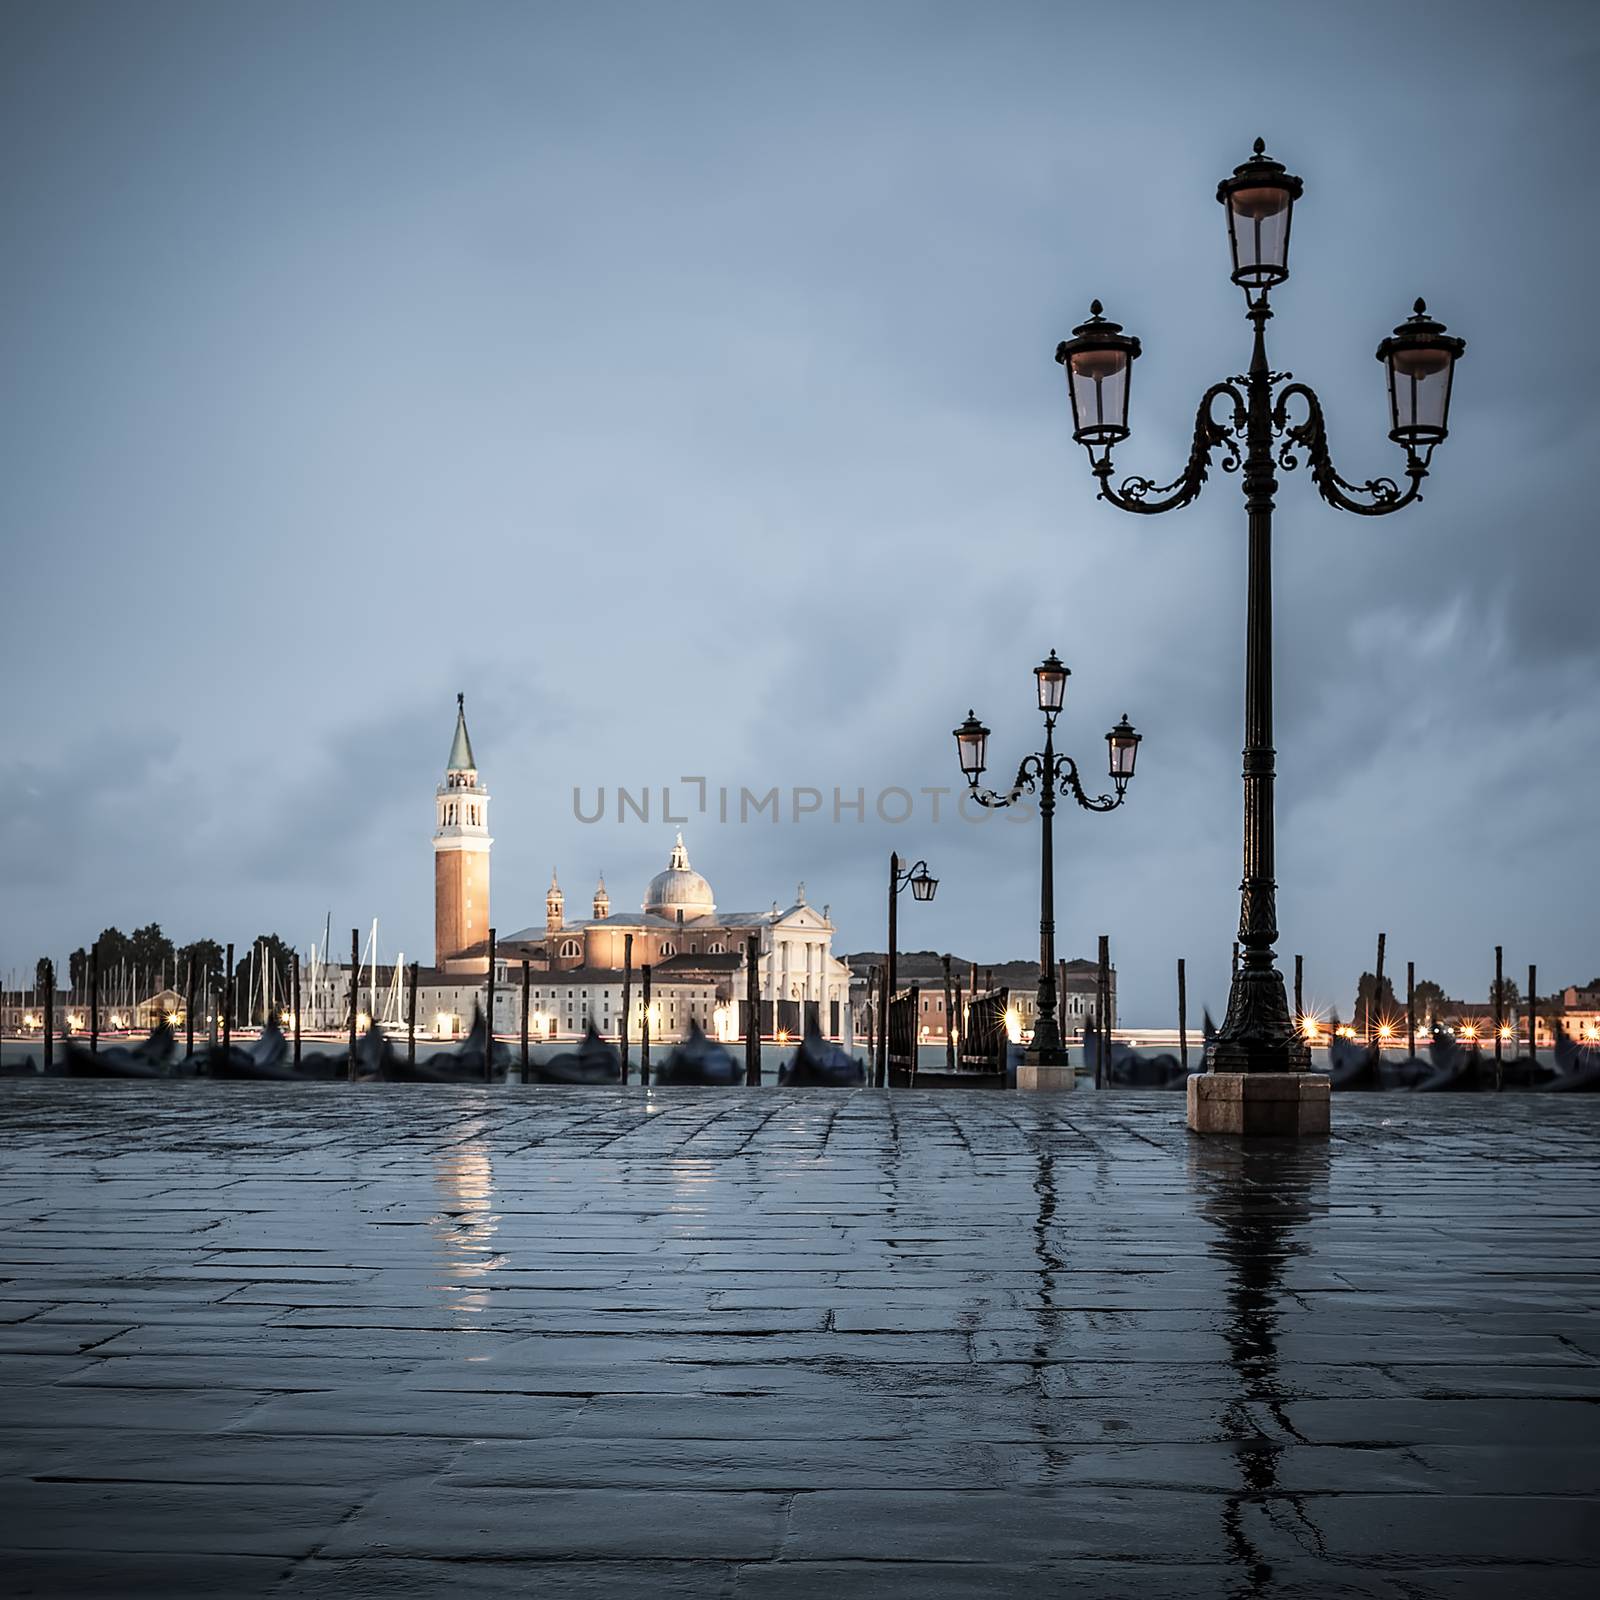 Grand Canal on a cloudy day, Venice. by vwalakte